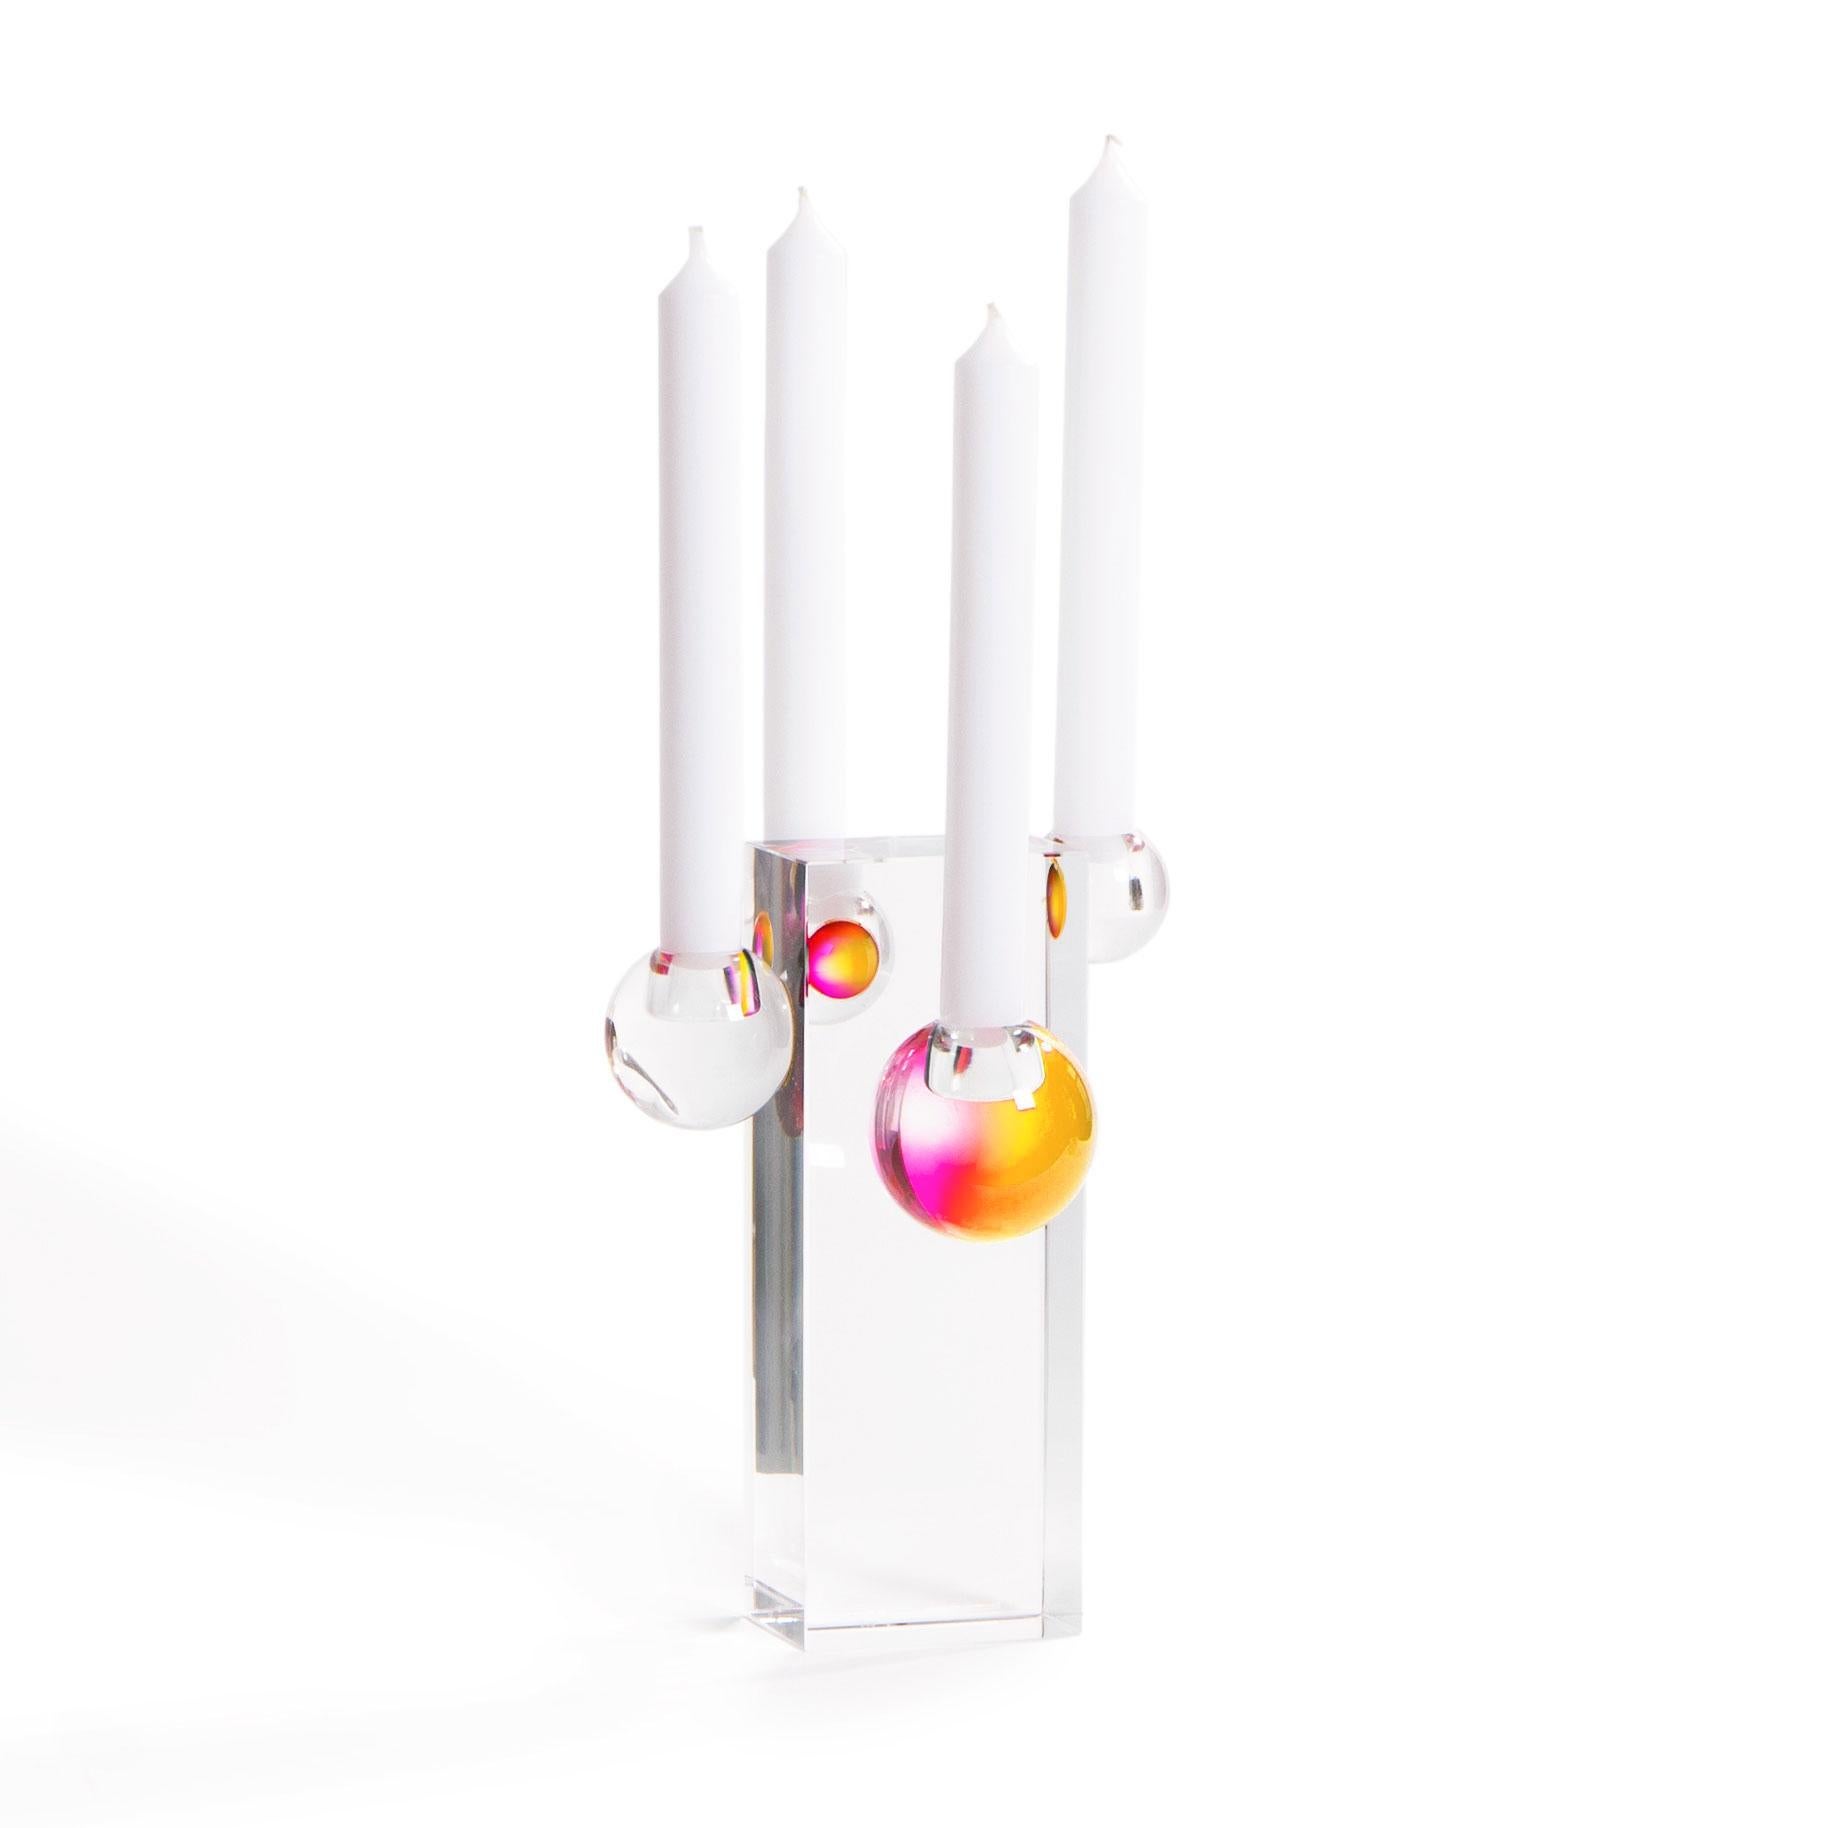 Candelabra for 4 candles.
4 crystal balls are applied to a solid monolithic crystal block, using a special pigmented bond that reveals a unique tie-dye effect.
Extinguish flame before it touches glass. Never leave a flame unattended.

Dimensions:
16